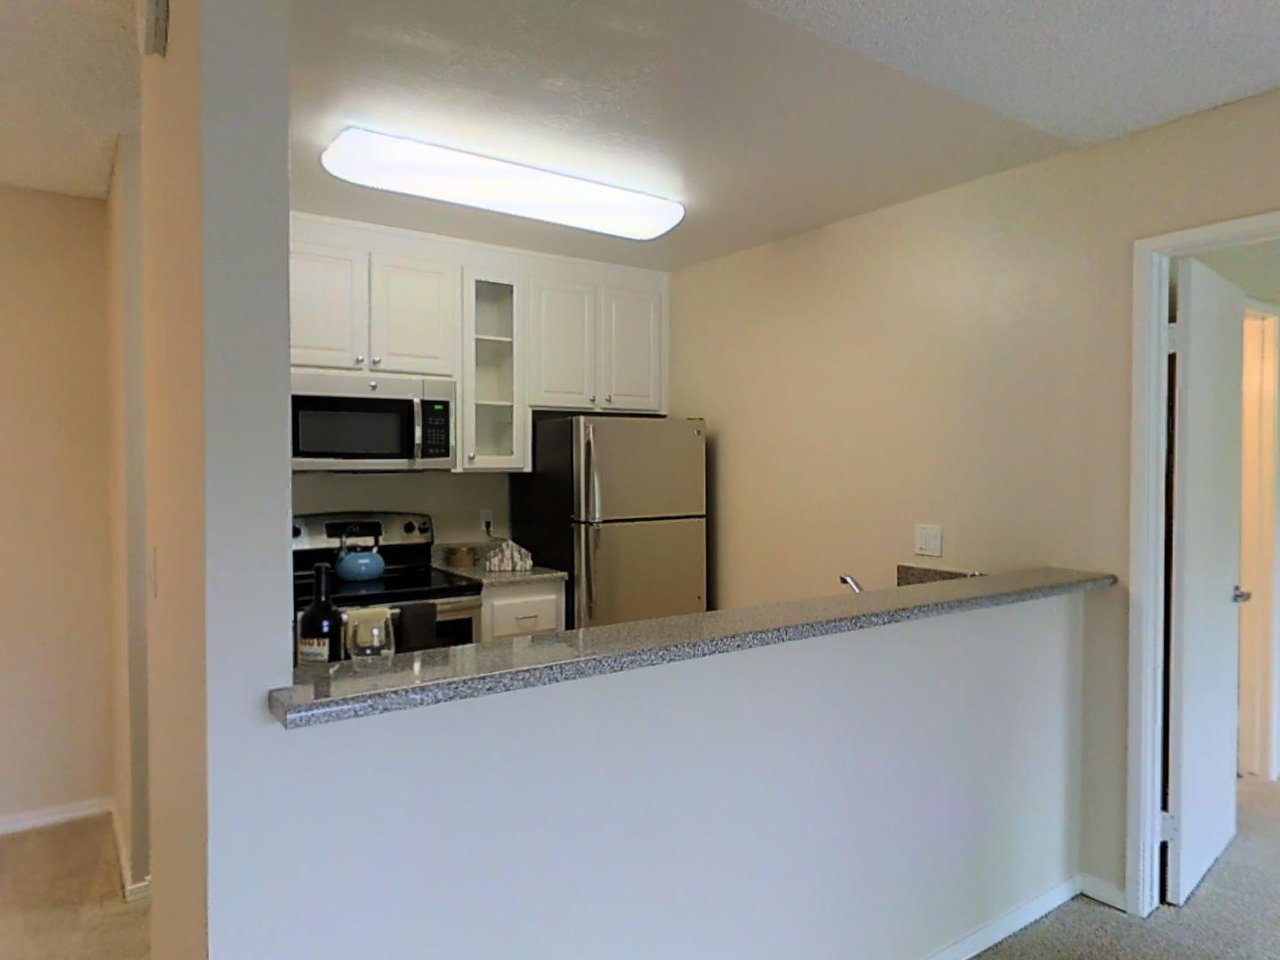 Le Parc Apartments for Rent 440 N Winchester Blvd, Santa Clara, CA 95050 with 2 Floorplans